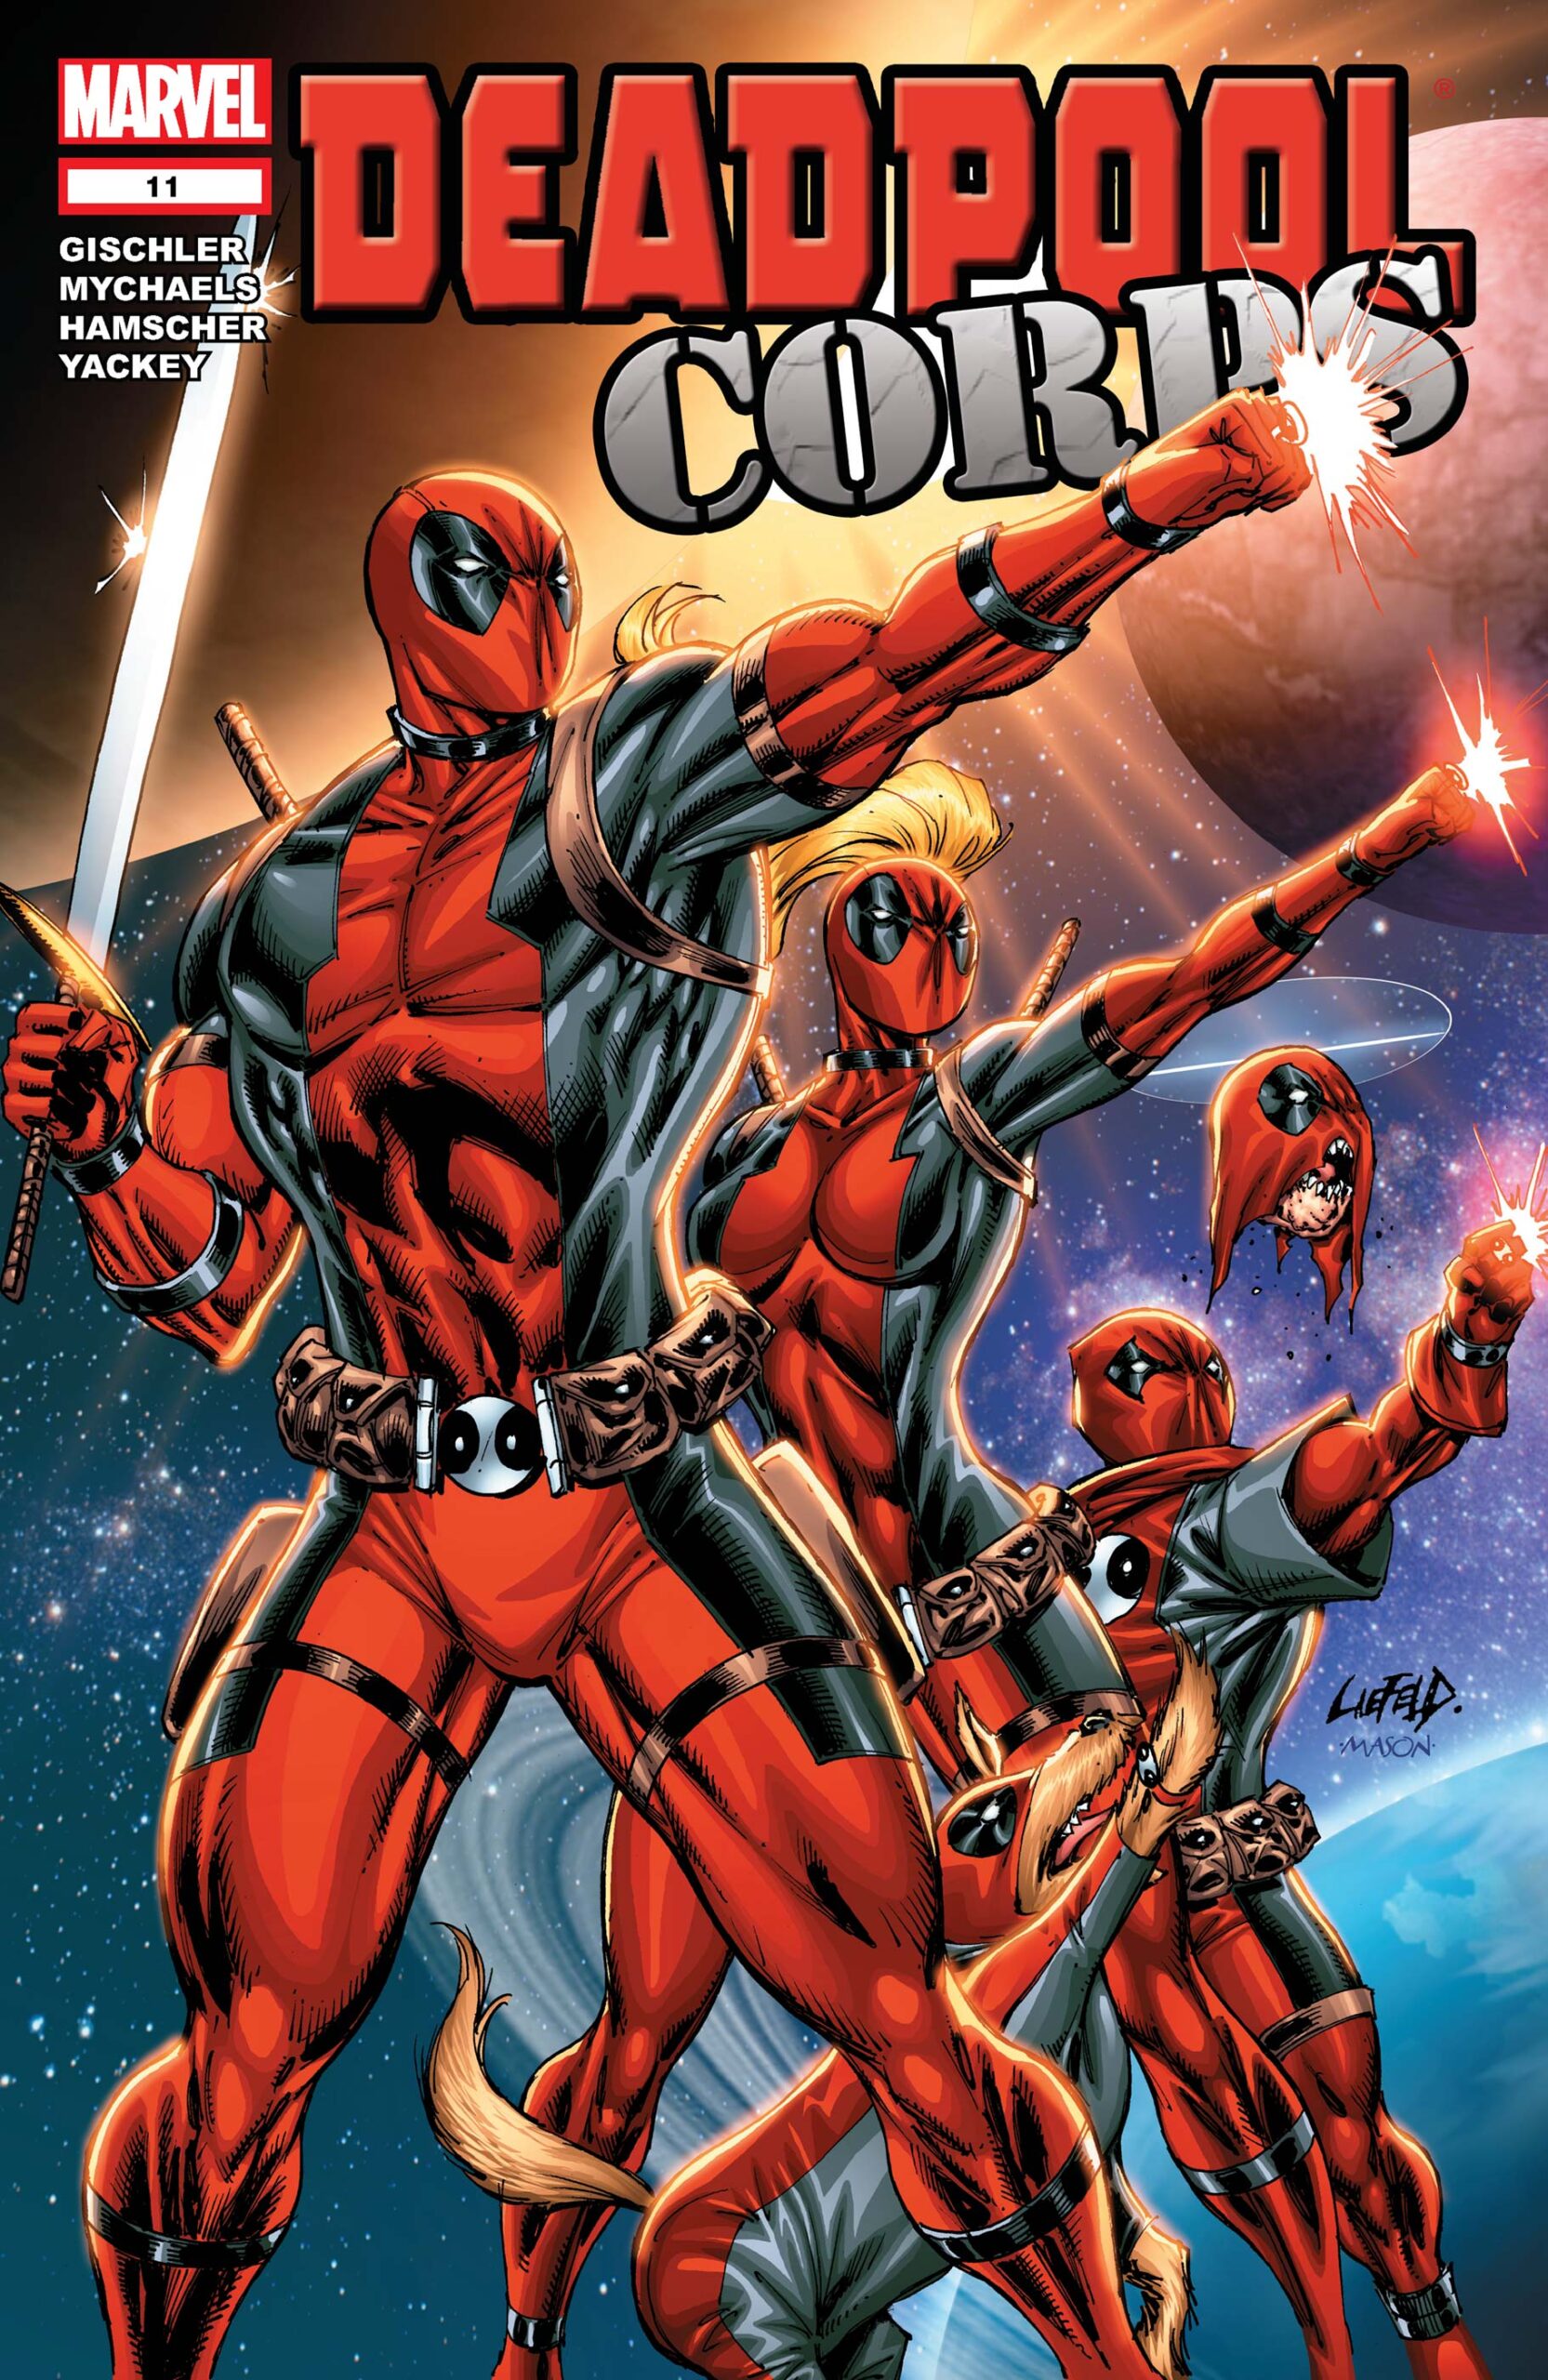 The Deadpool Corps stands assembled on Rob Liefeld and Thomas Mason's cover for Deadpool Corps Vol. 1 #11 (2011), Marvel Comics